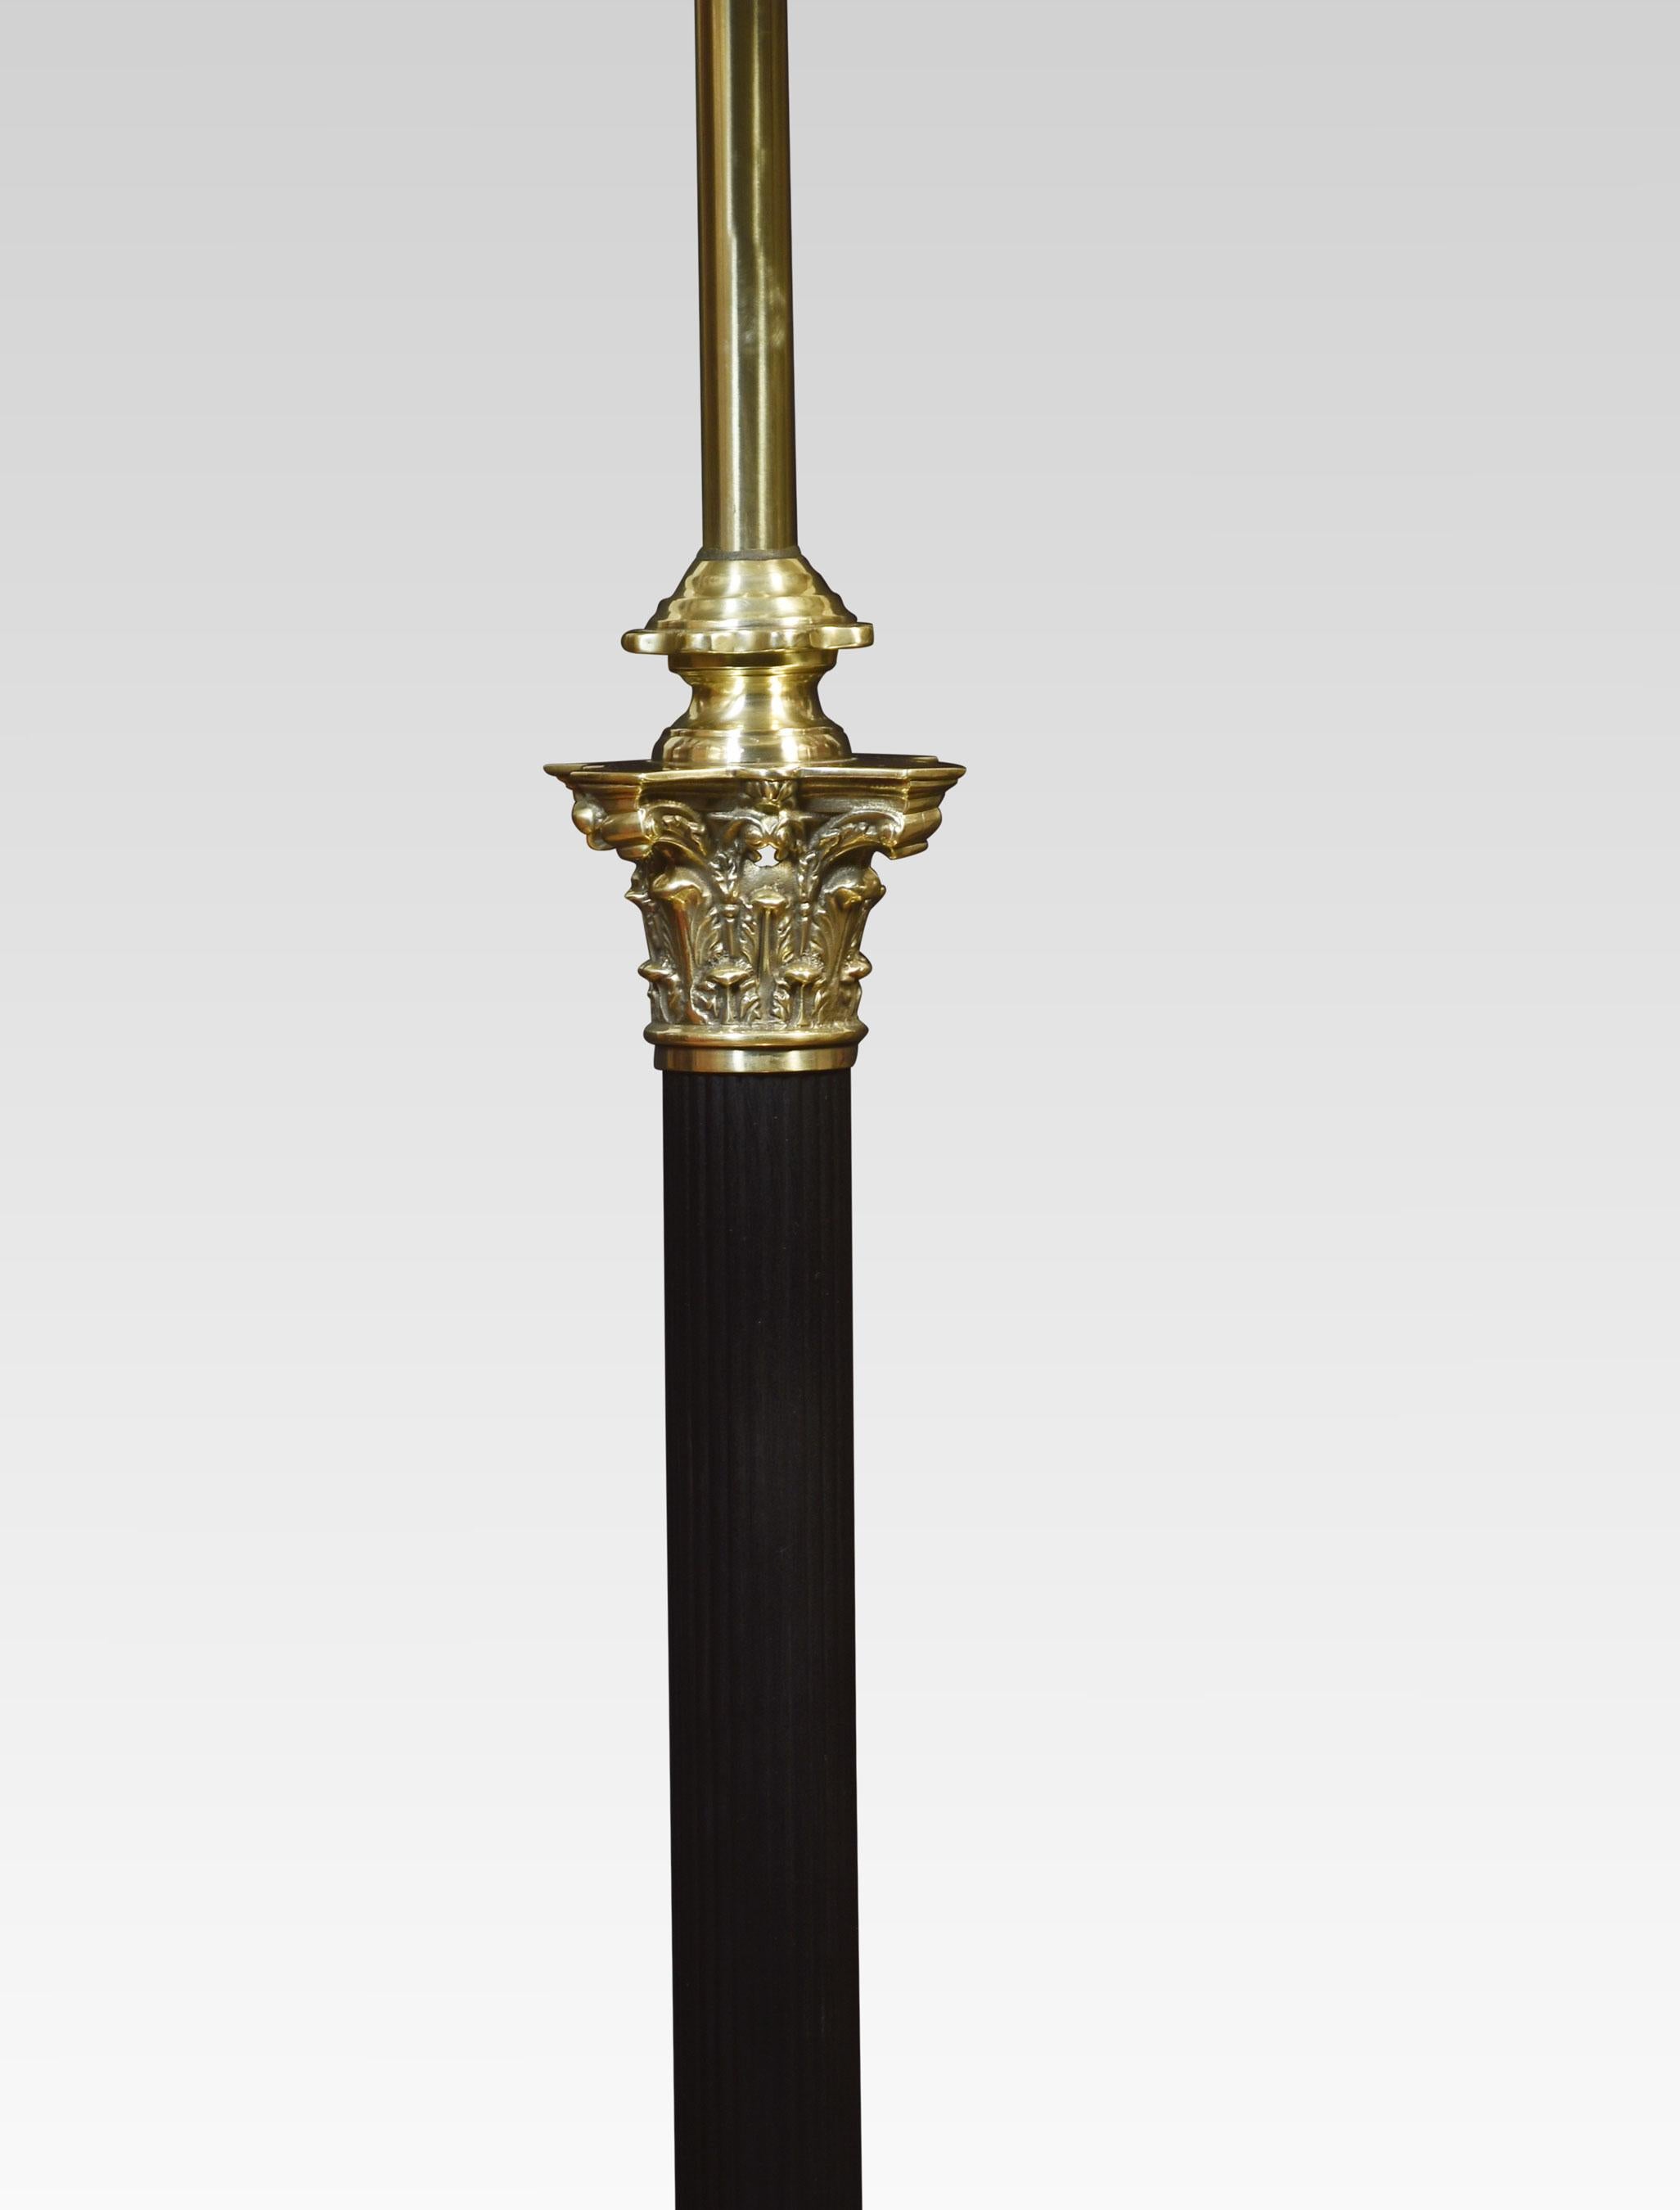 19th century Brass standard lamp. Having a Corinthian column and adjustable stem, raised up on a stepped square base terminating in paw feet. Converted for electricity.
Dimensions
Height 58 Inches adjustable to 64 Inches
Width 14 Inches
Depth 14